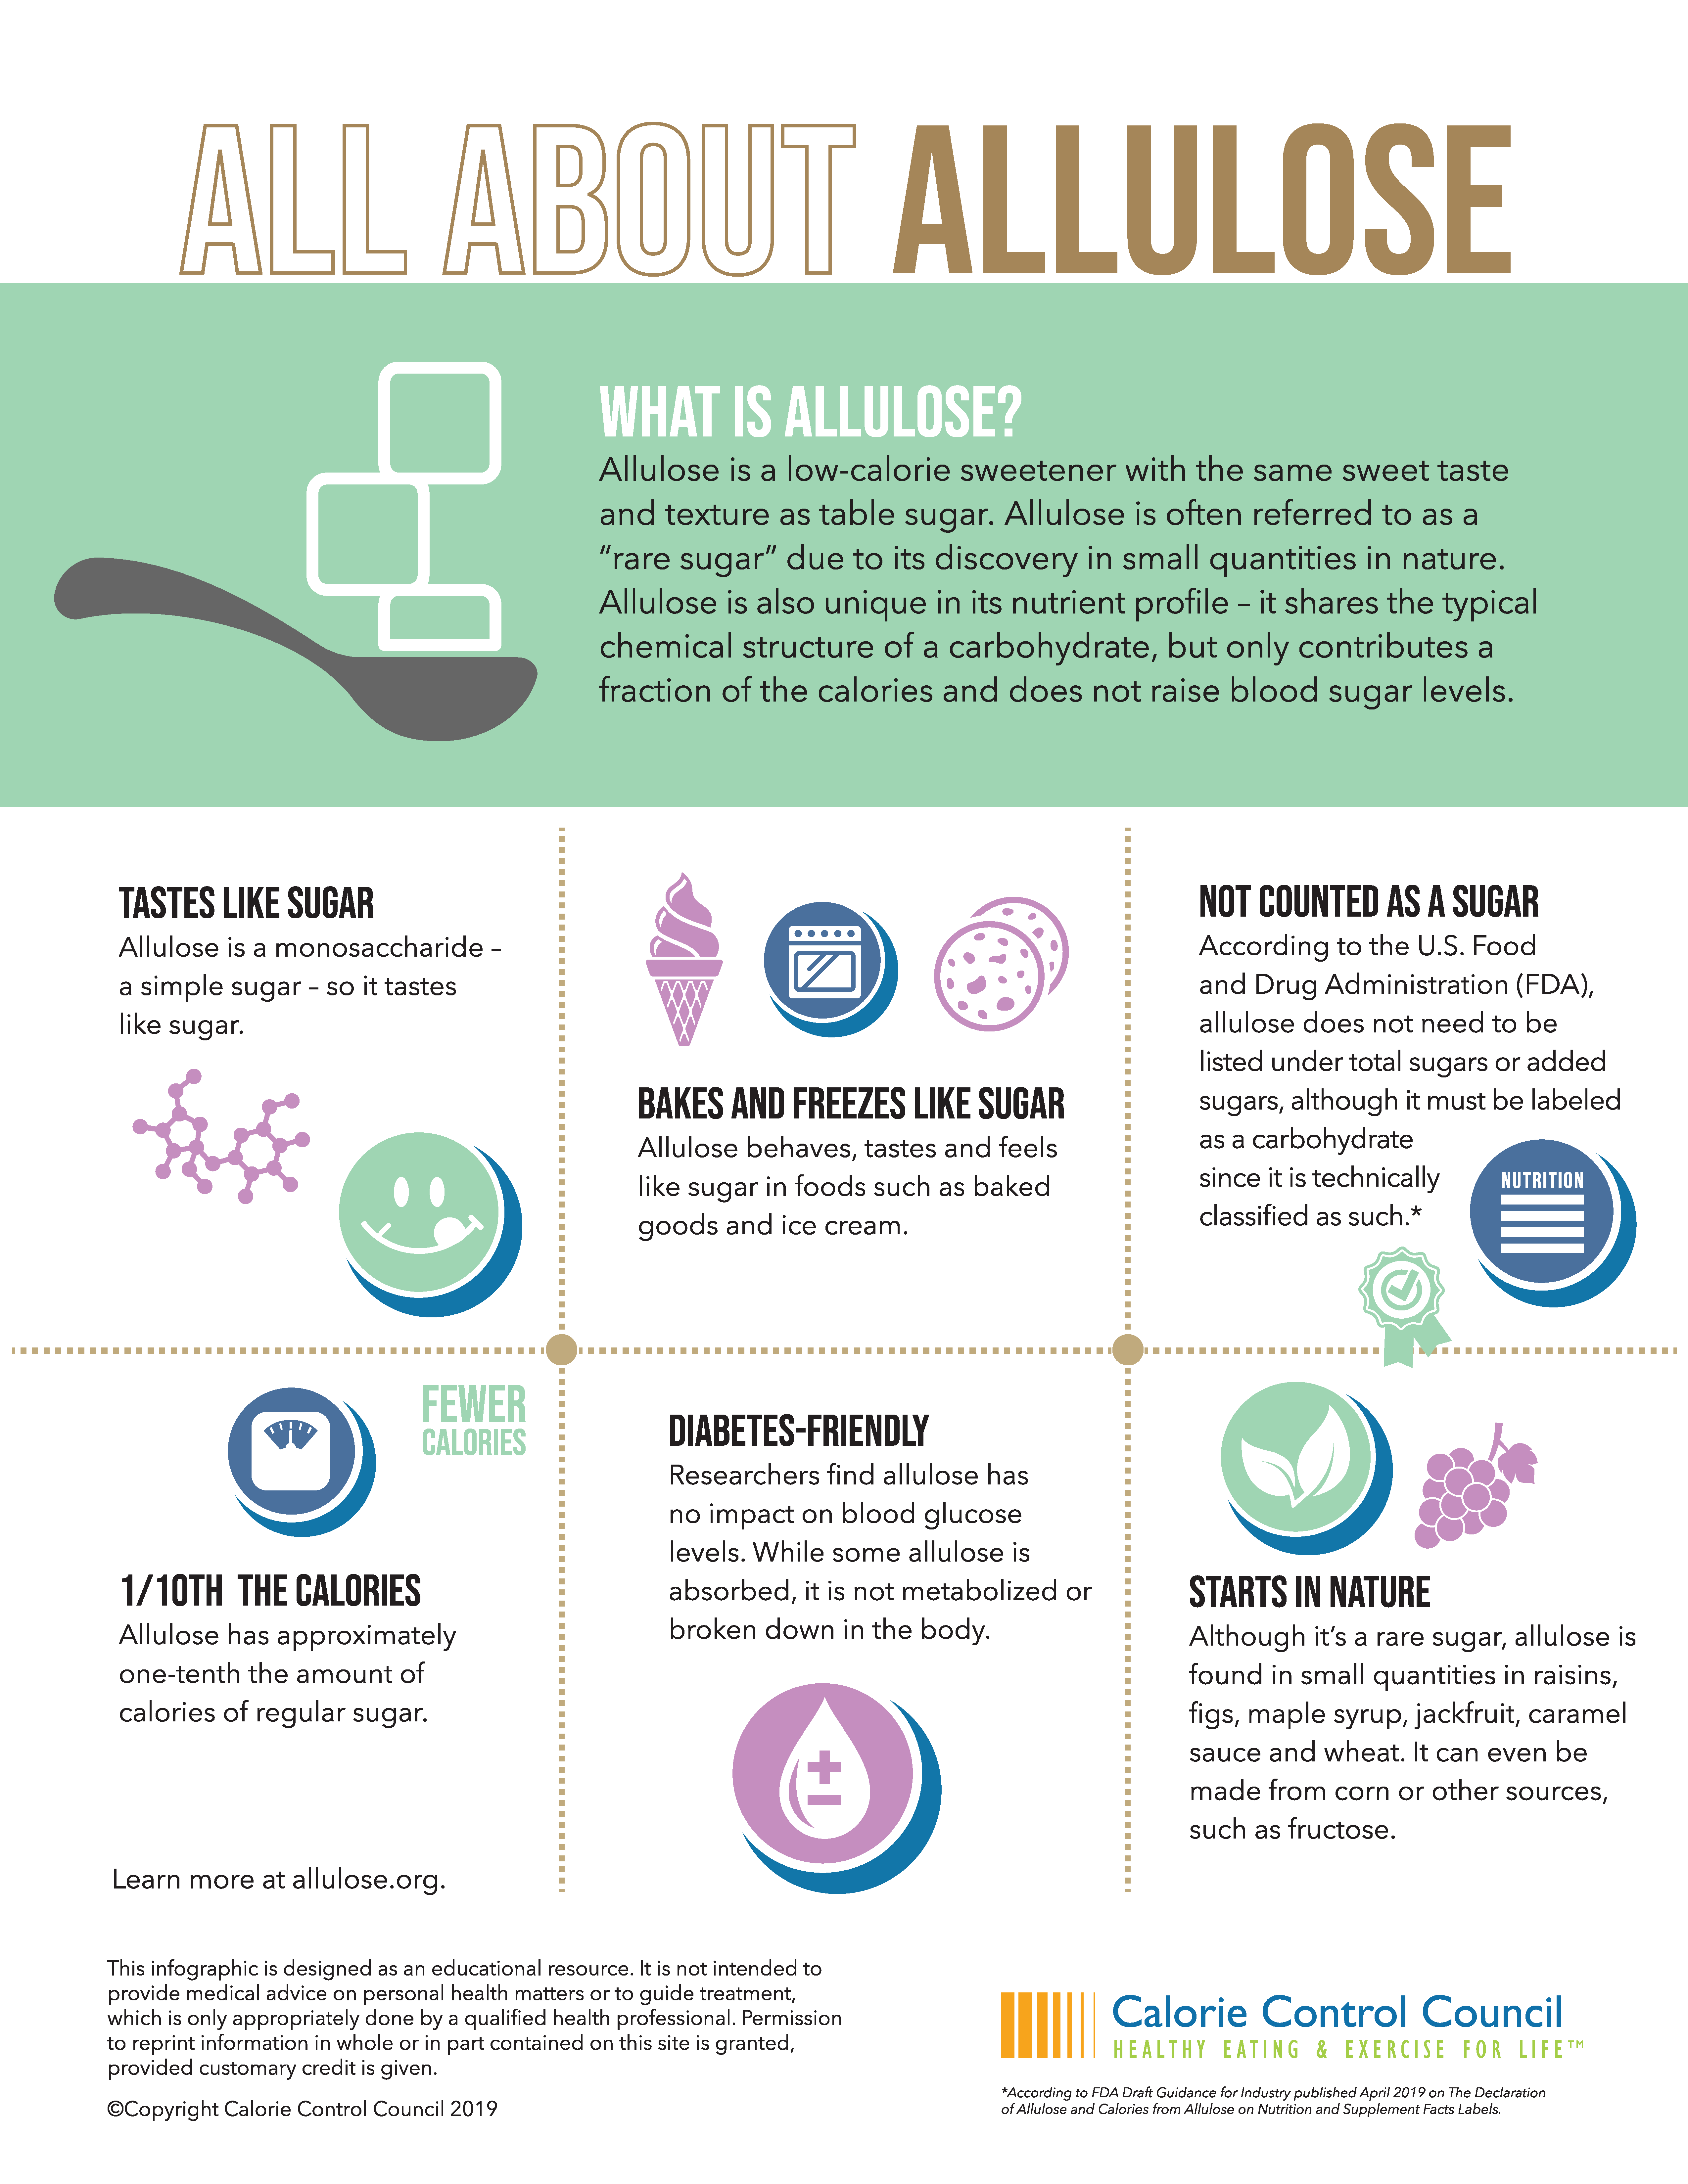 What Is Allulose & What Is It Made From?